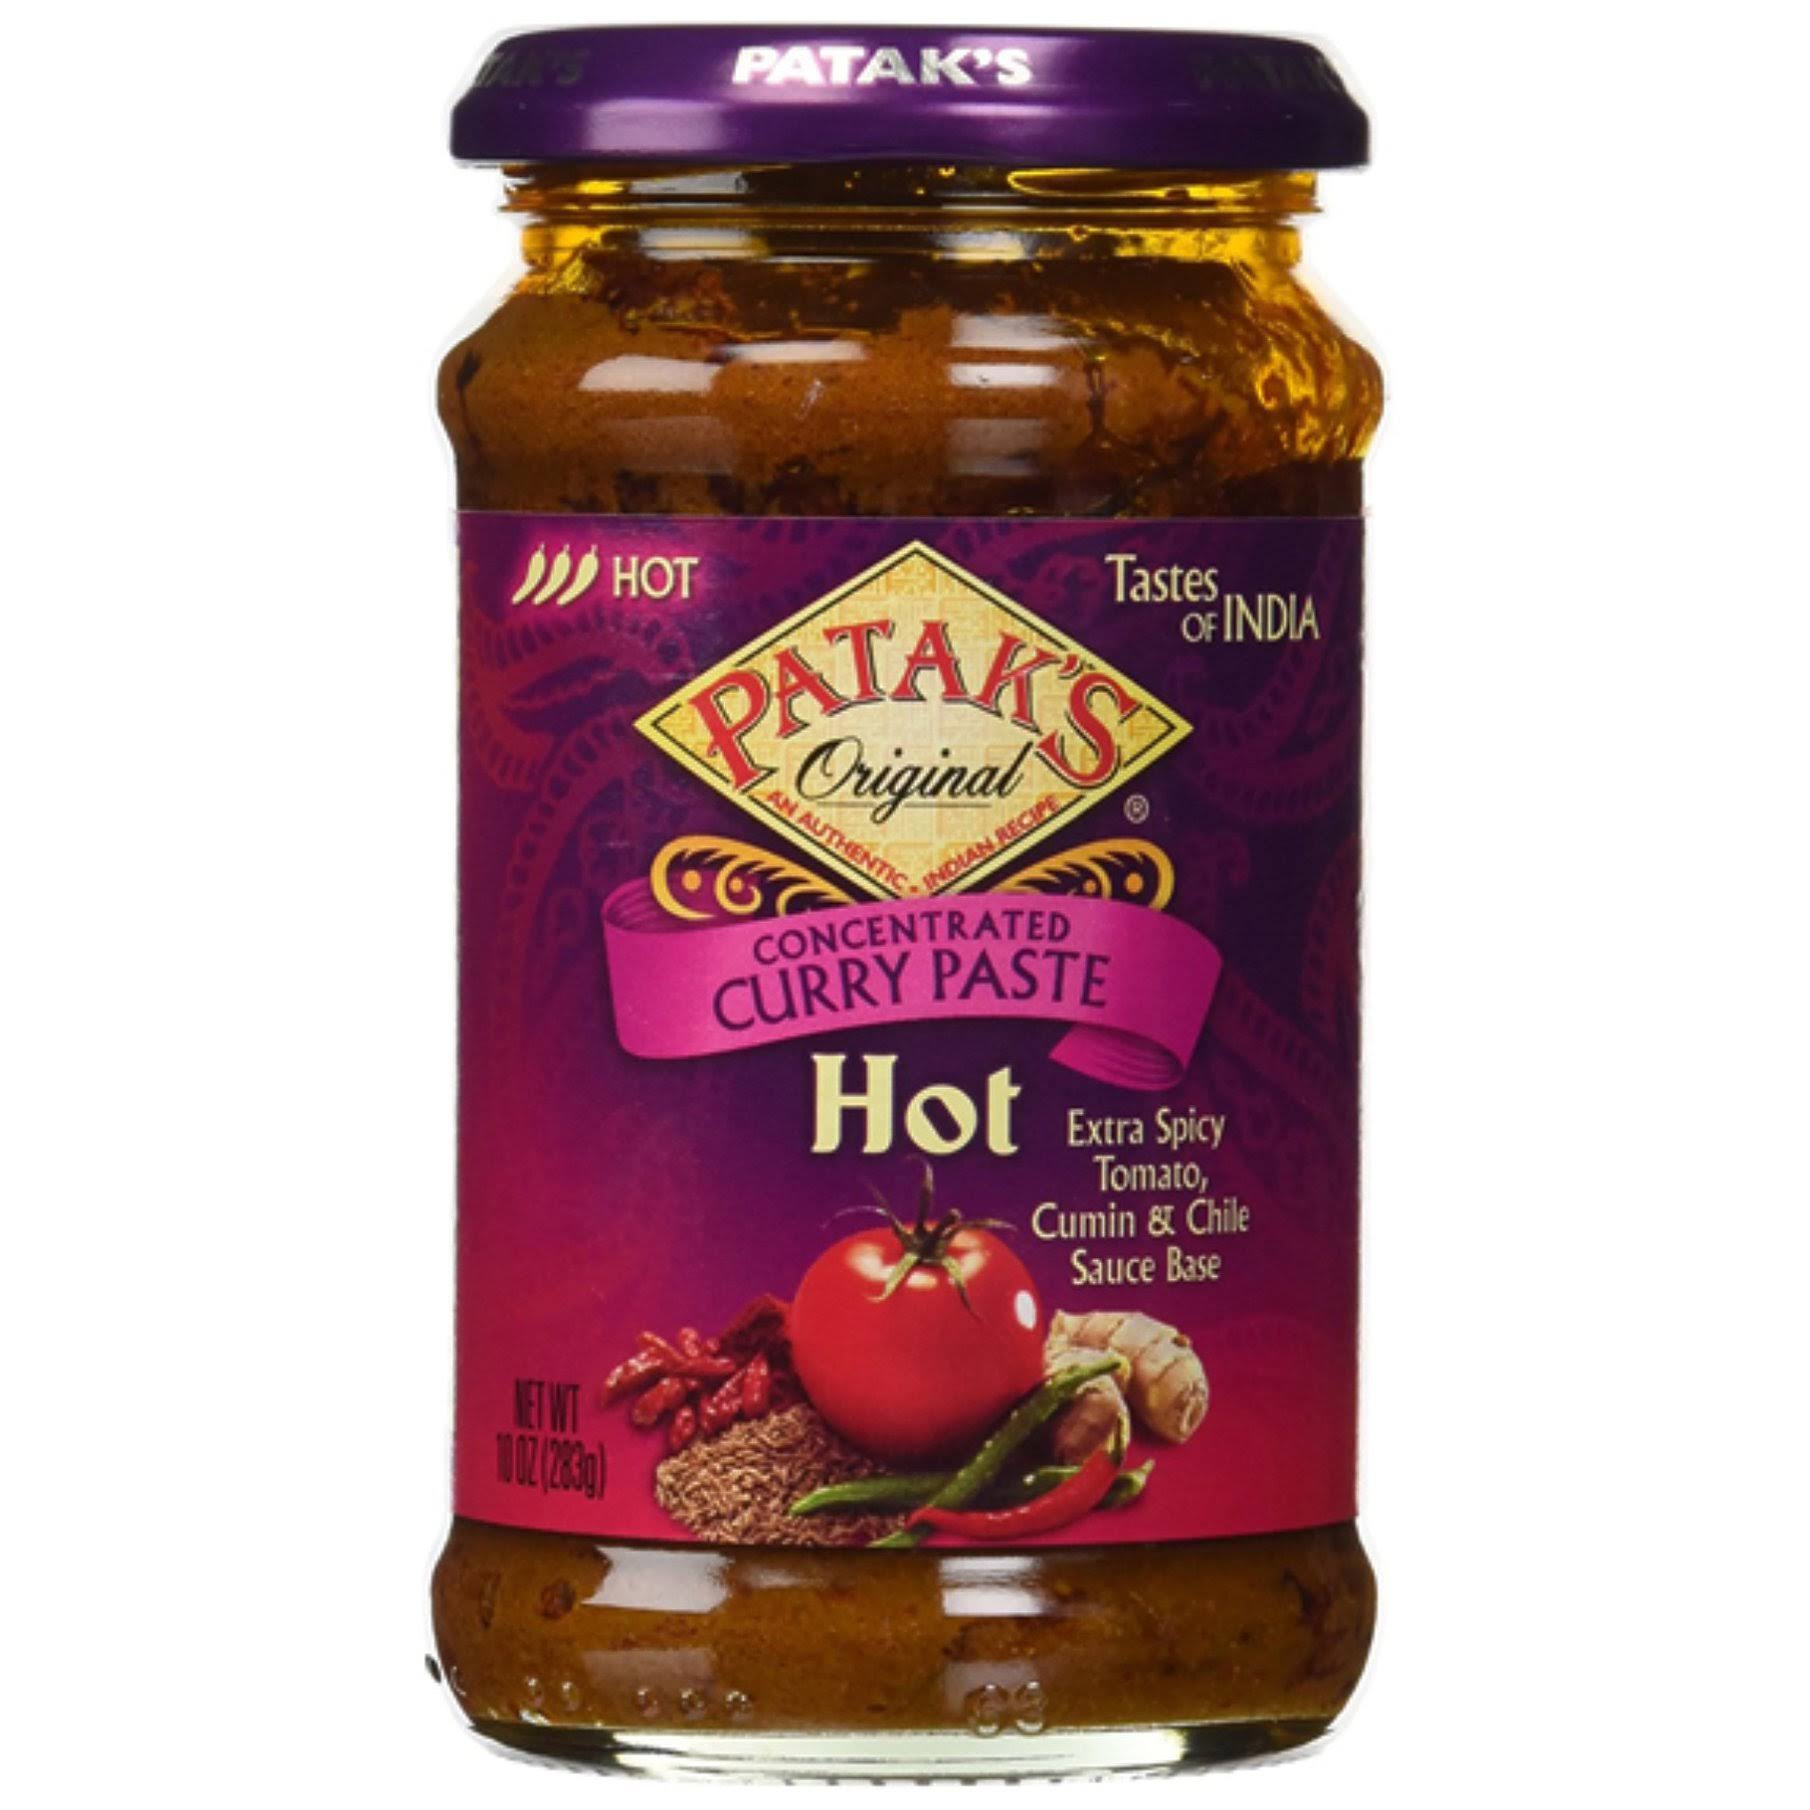 Pataks Concentrated Curry Paste - Hot, 283g